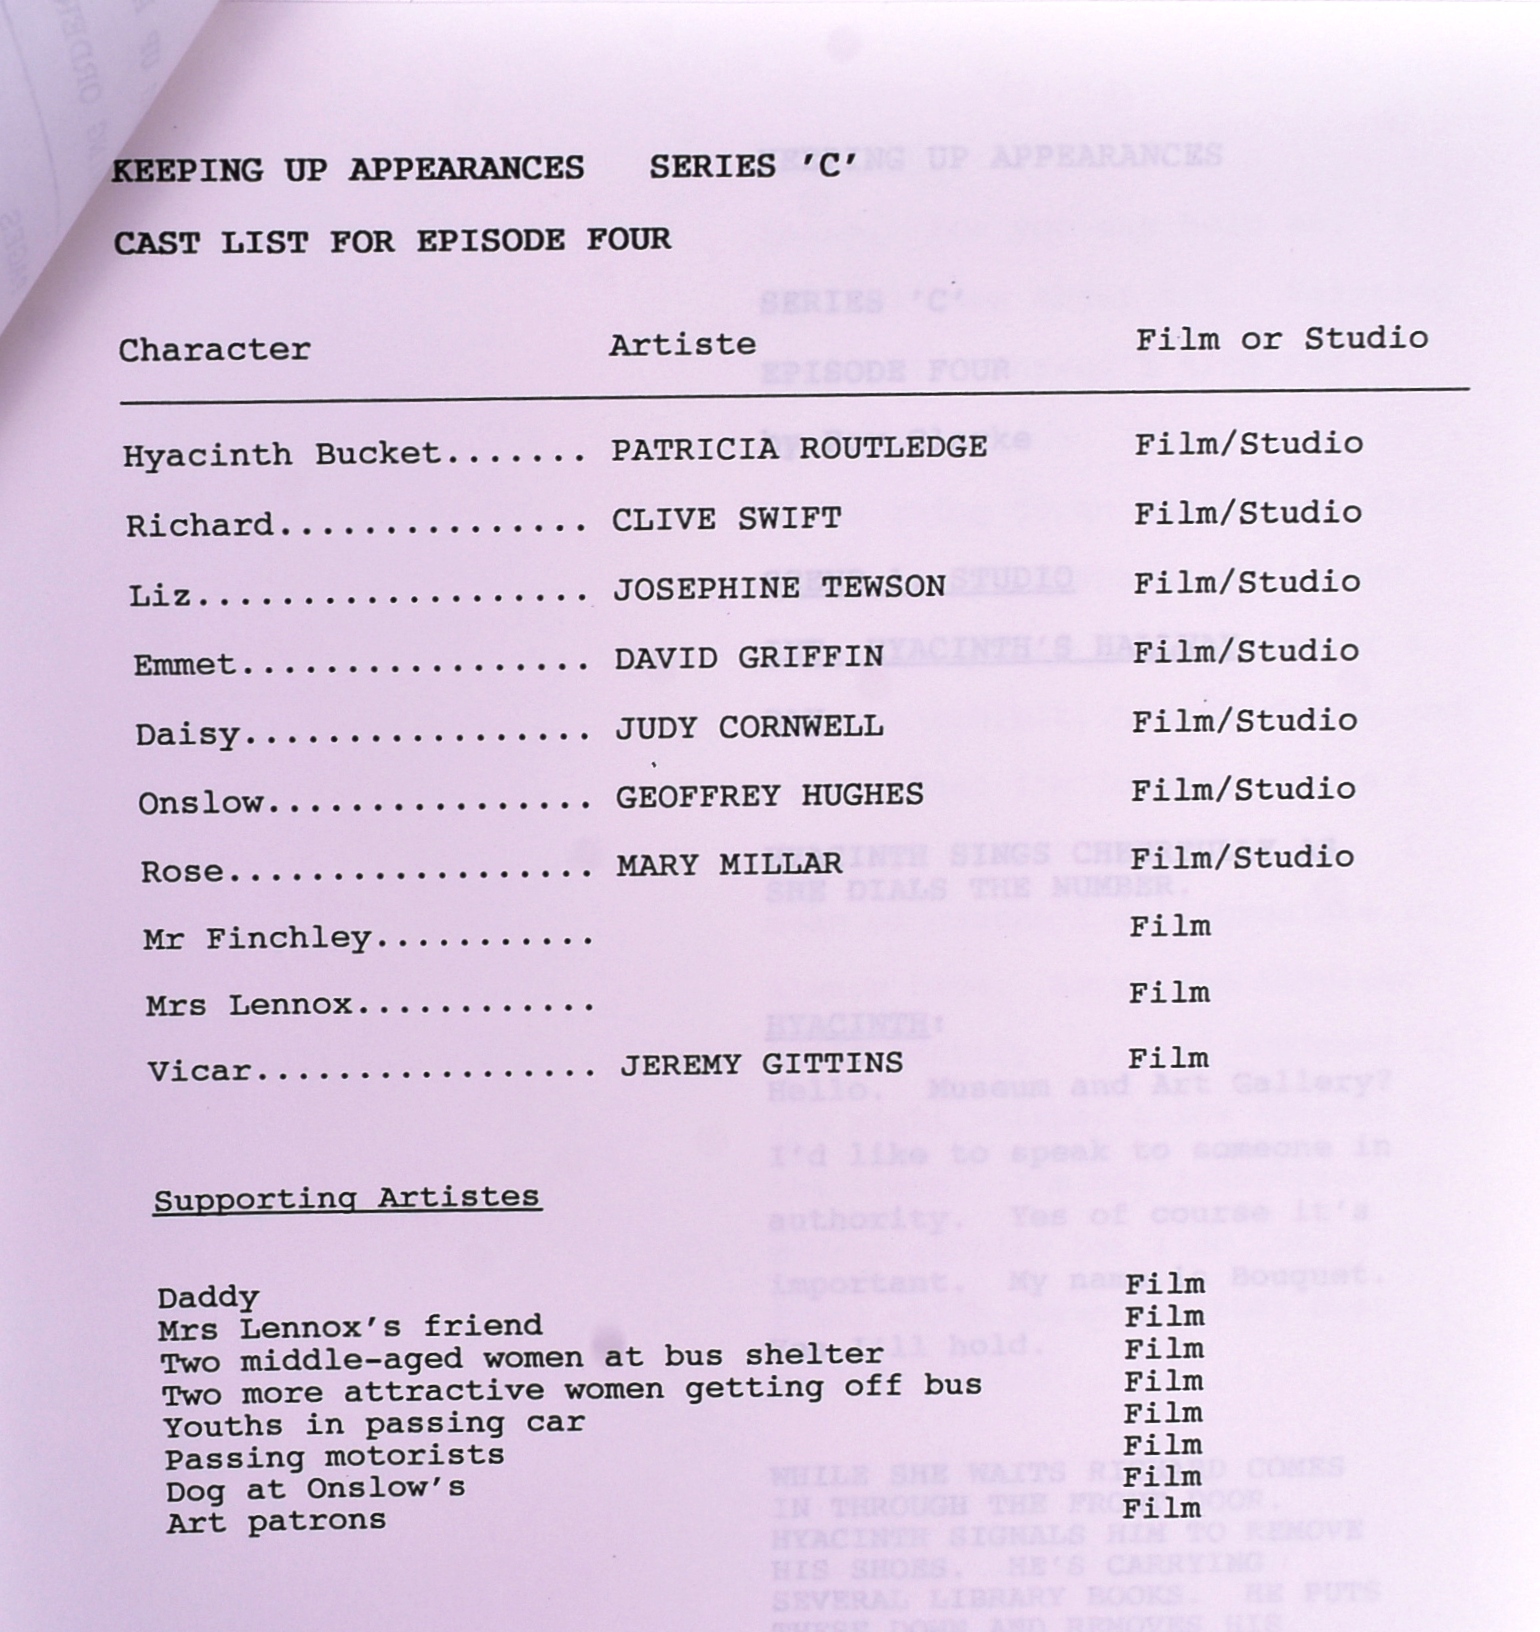 ORIGINAL KEEPING UP APPEARANCES PRODUCTION USED SCRIPT - Image 4 of 5